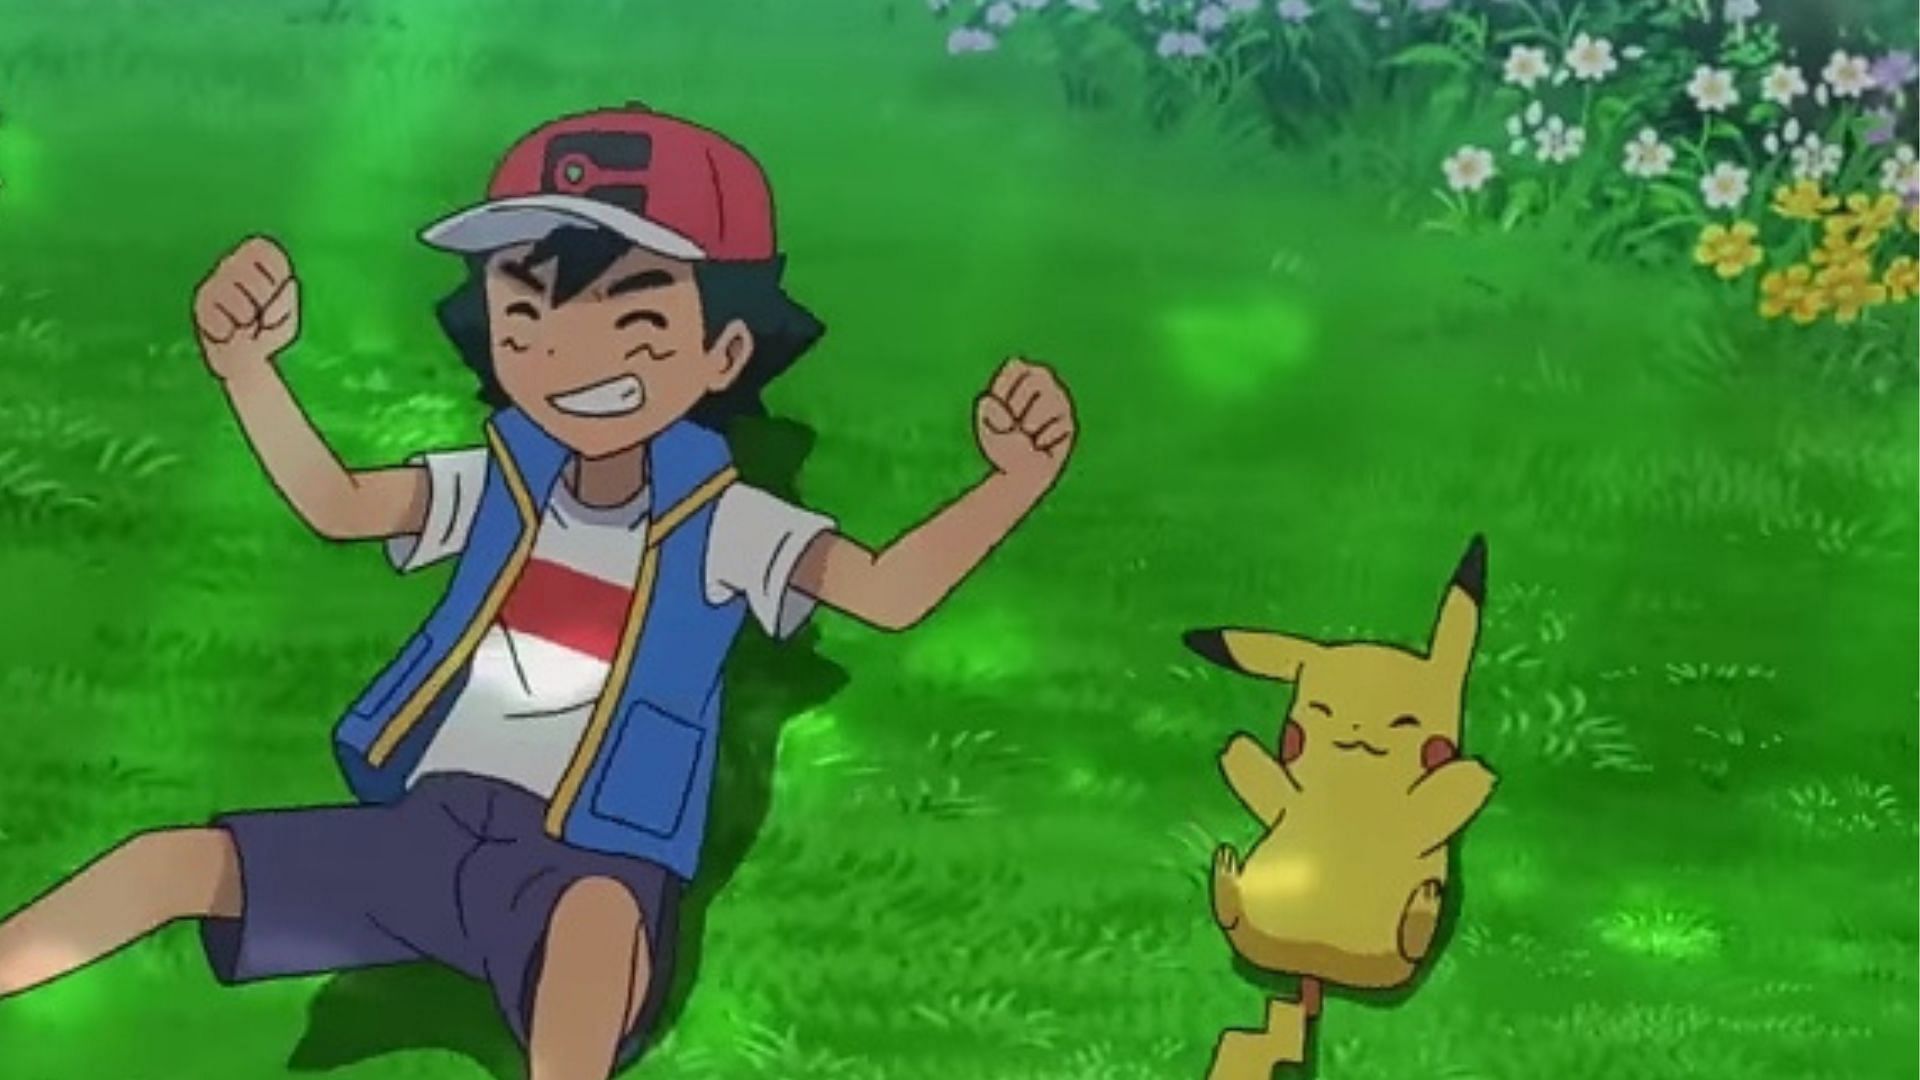 When will Pokemon Journeys end? Final episode date and more